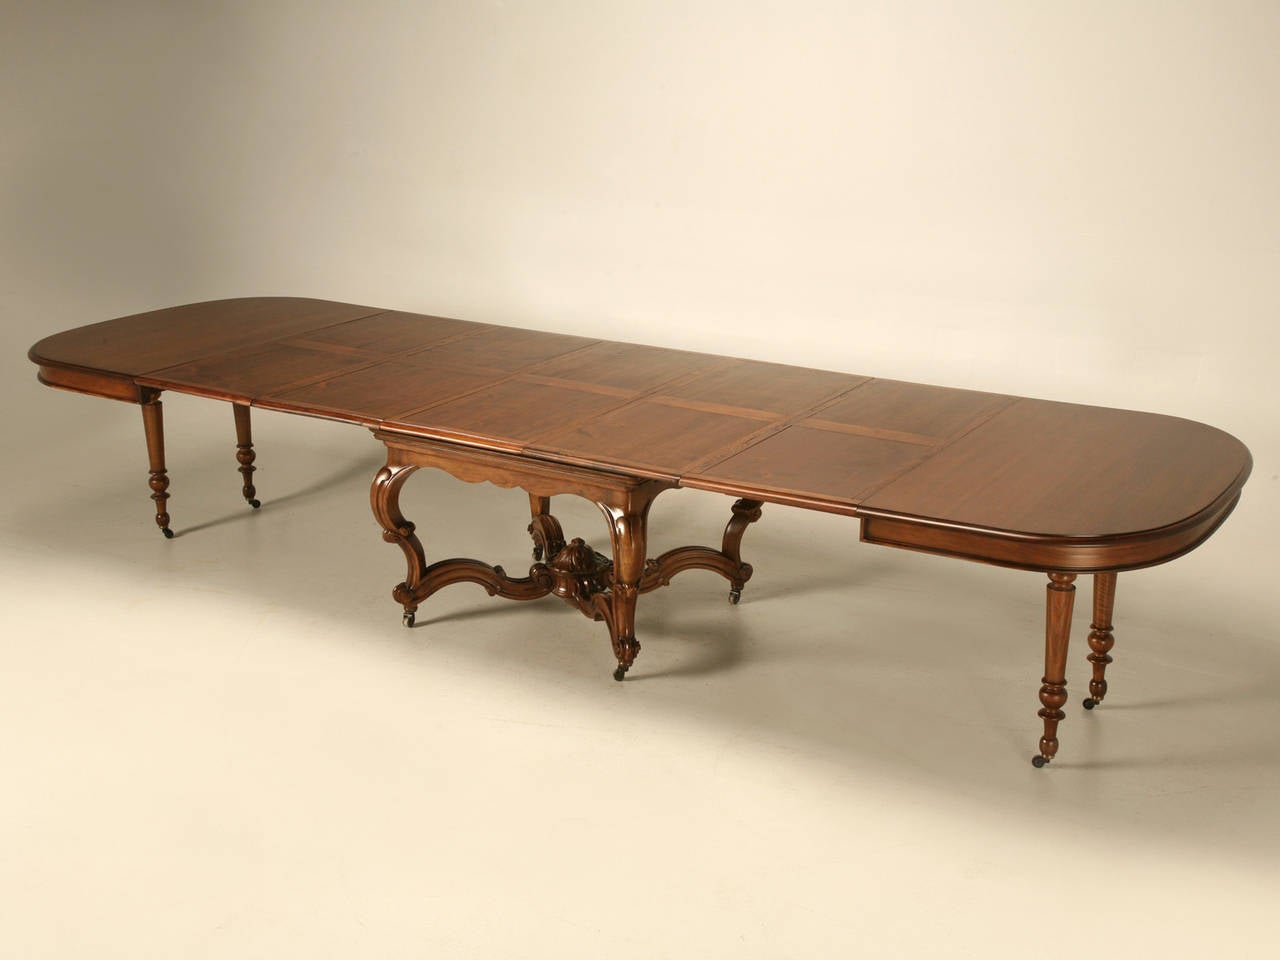 Antique French walnut dining table from Ch. Jeanselme & C°, Paris, who were a supplier of furniture to the Imperial Courts of France, circa 1890. Opened in 1824 as Jeanselme Freres, with the stamp changing to 'Ch. Jeanselme et Cie' in 1883 which was